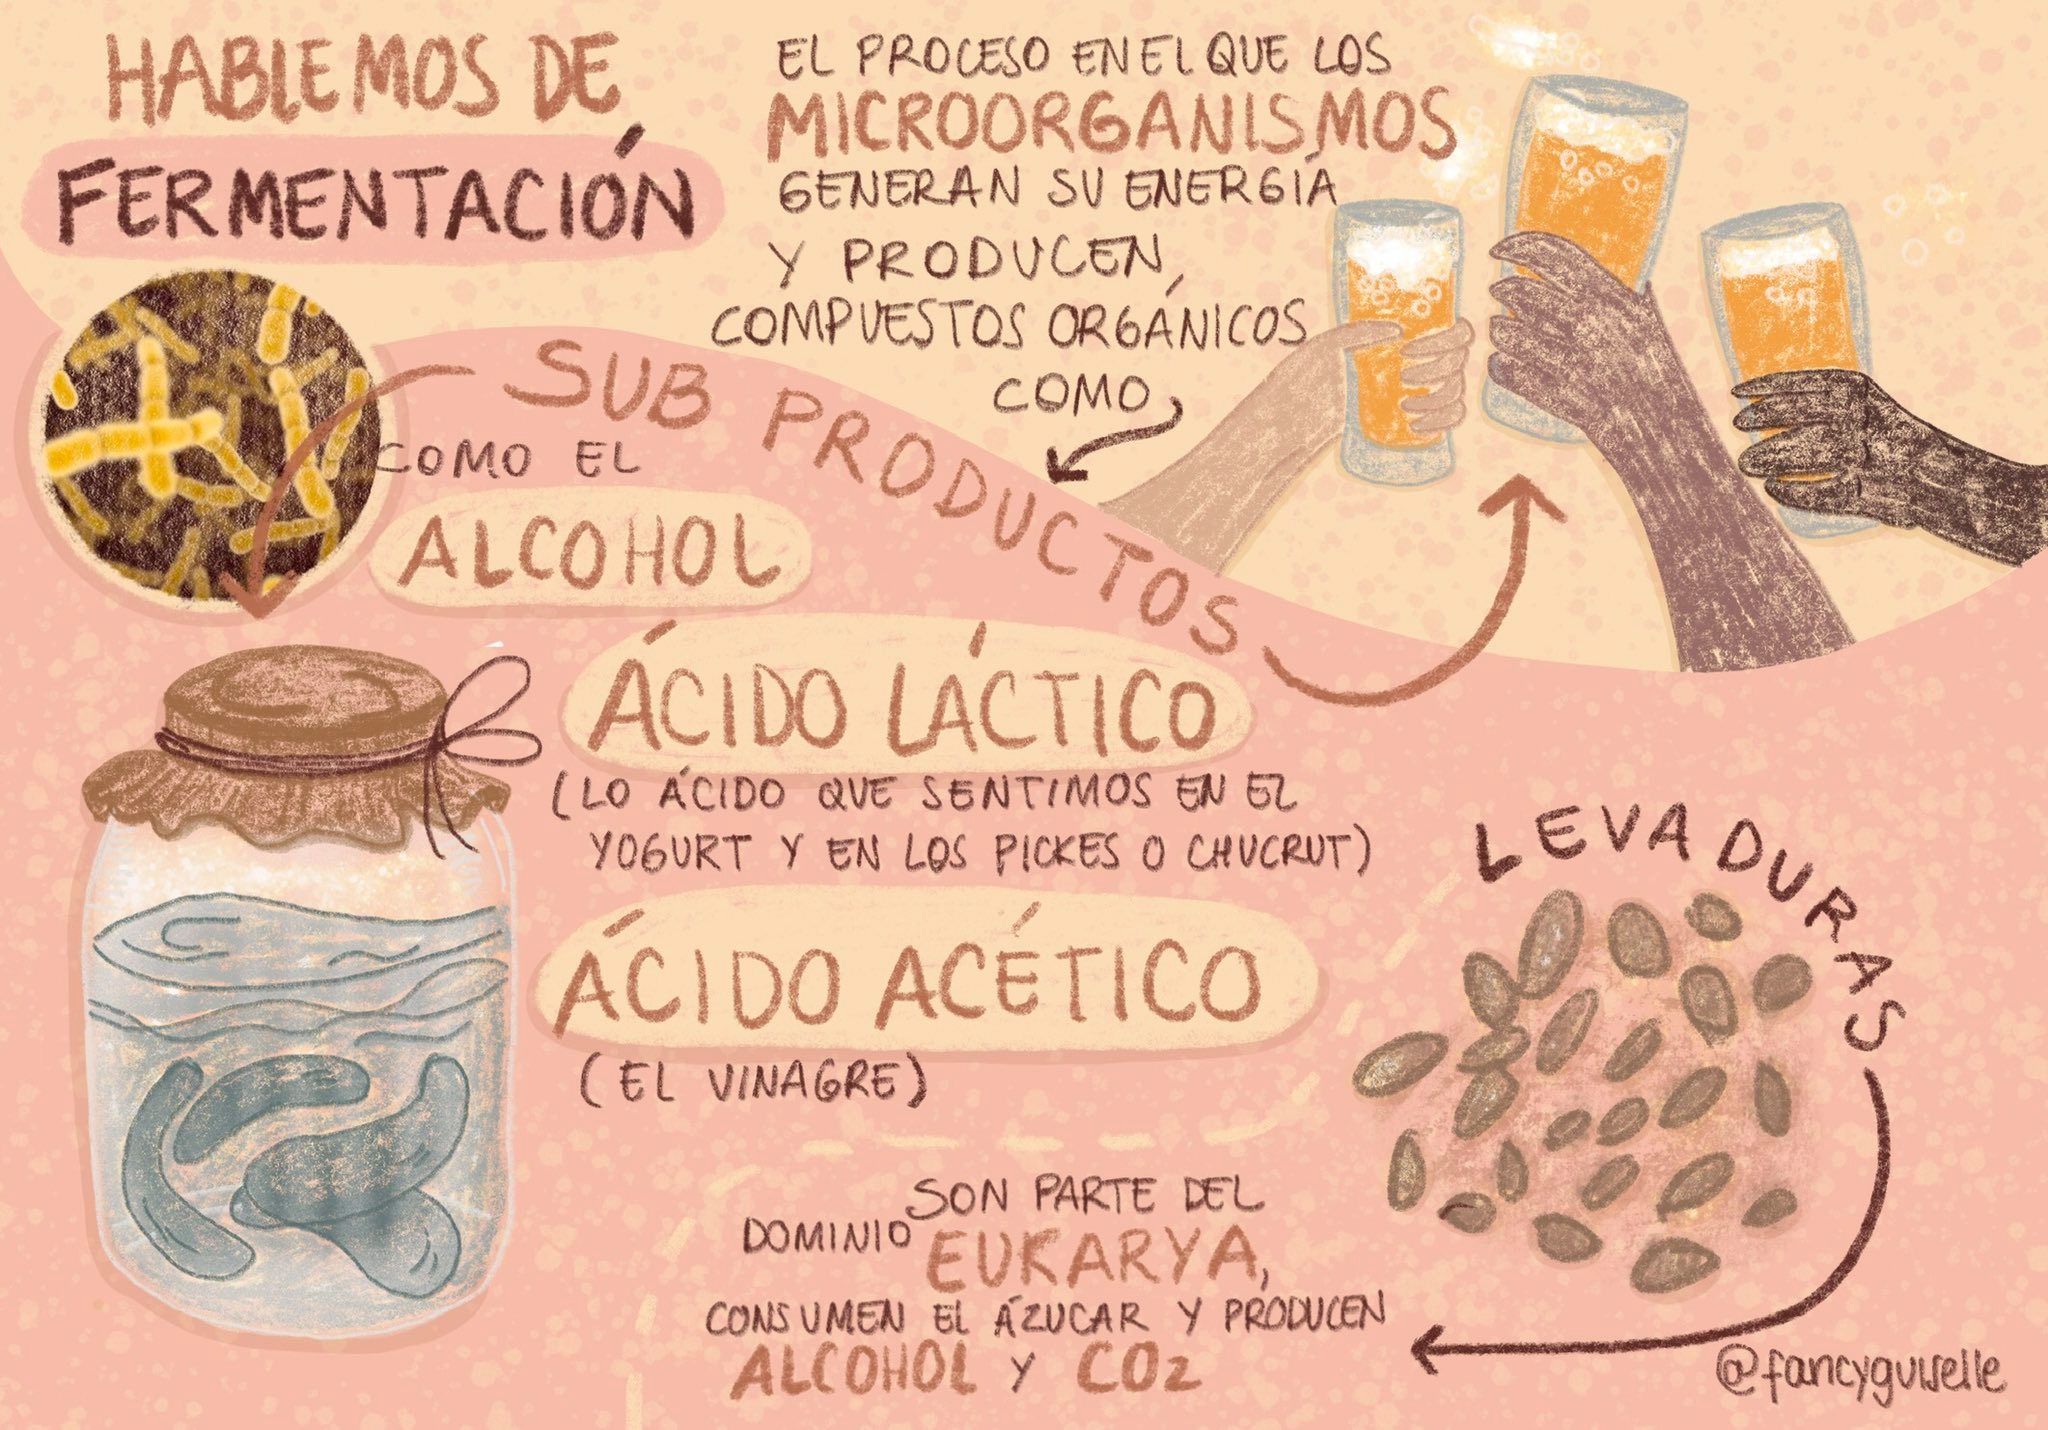 A graphic recording of the fermentation process. This illustration combines visual and written notes. Property of Fancy Guiselle